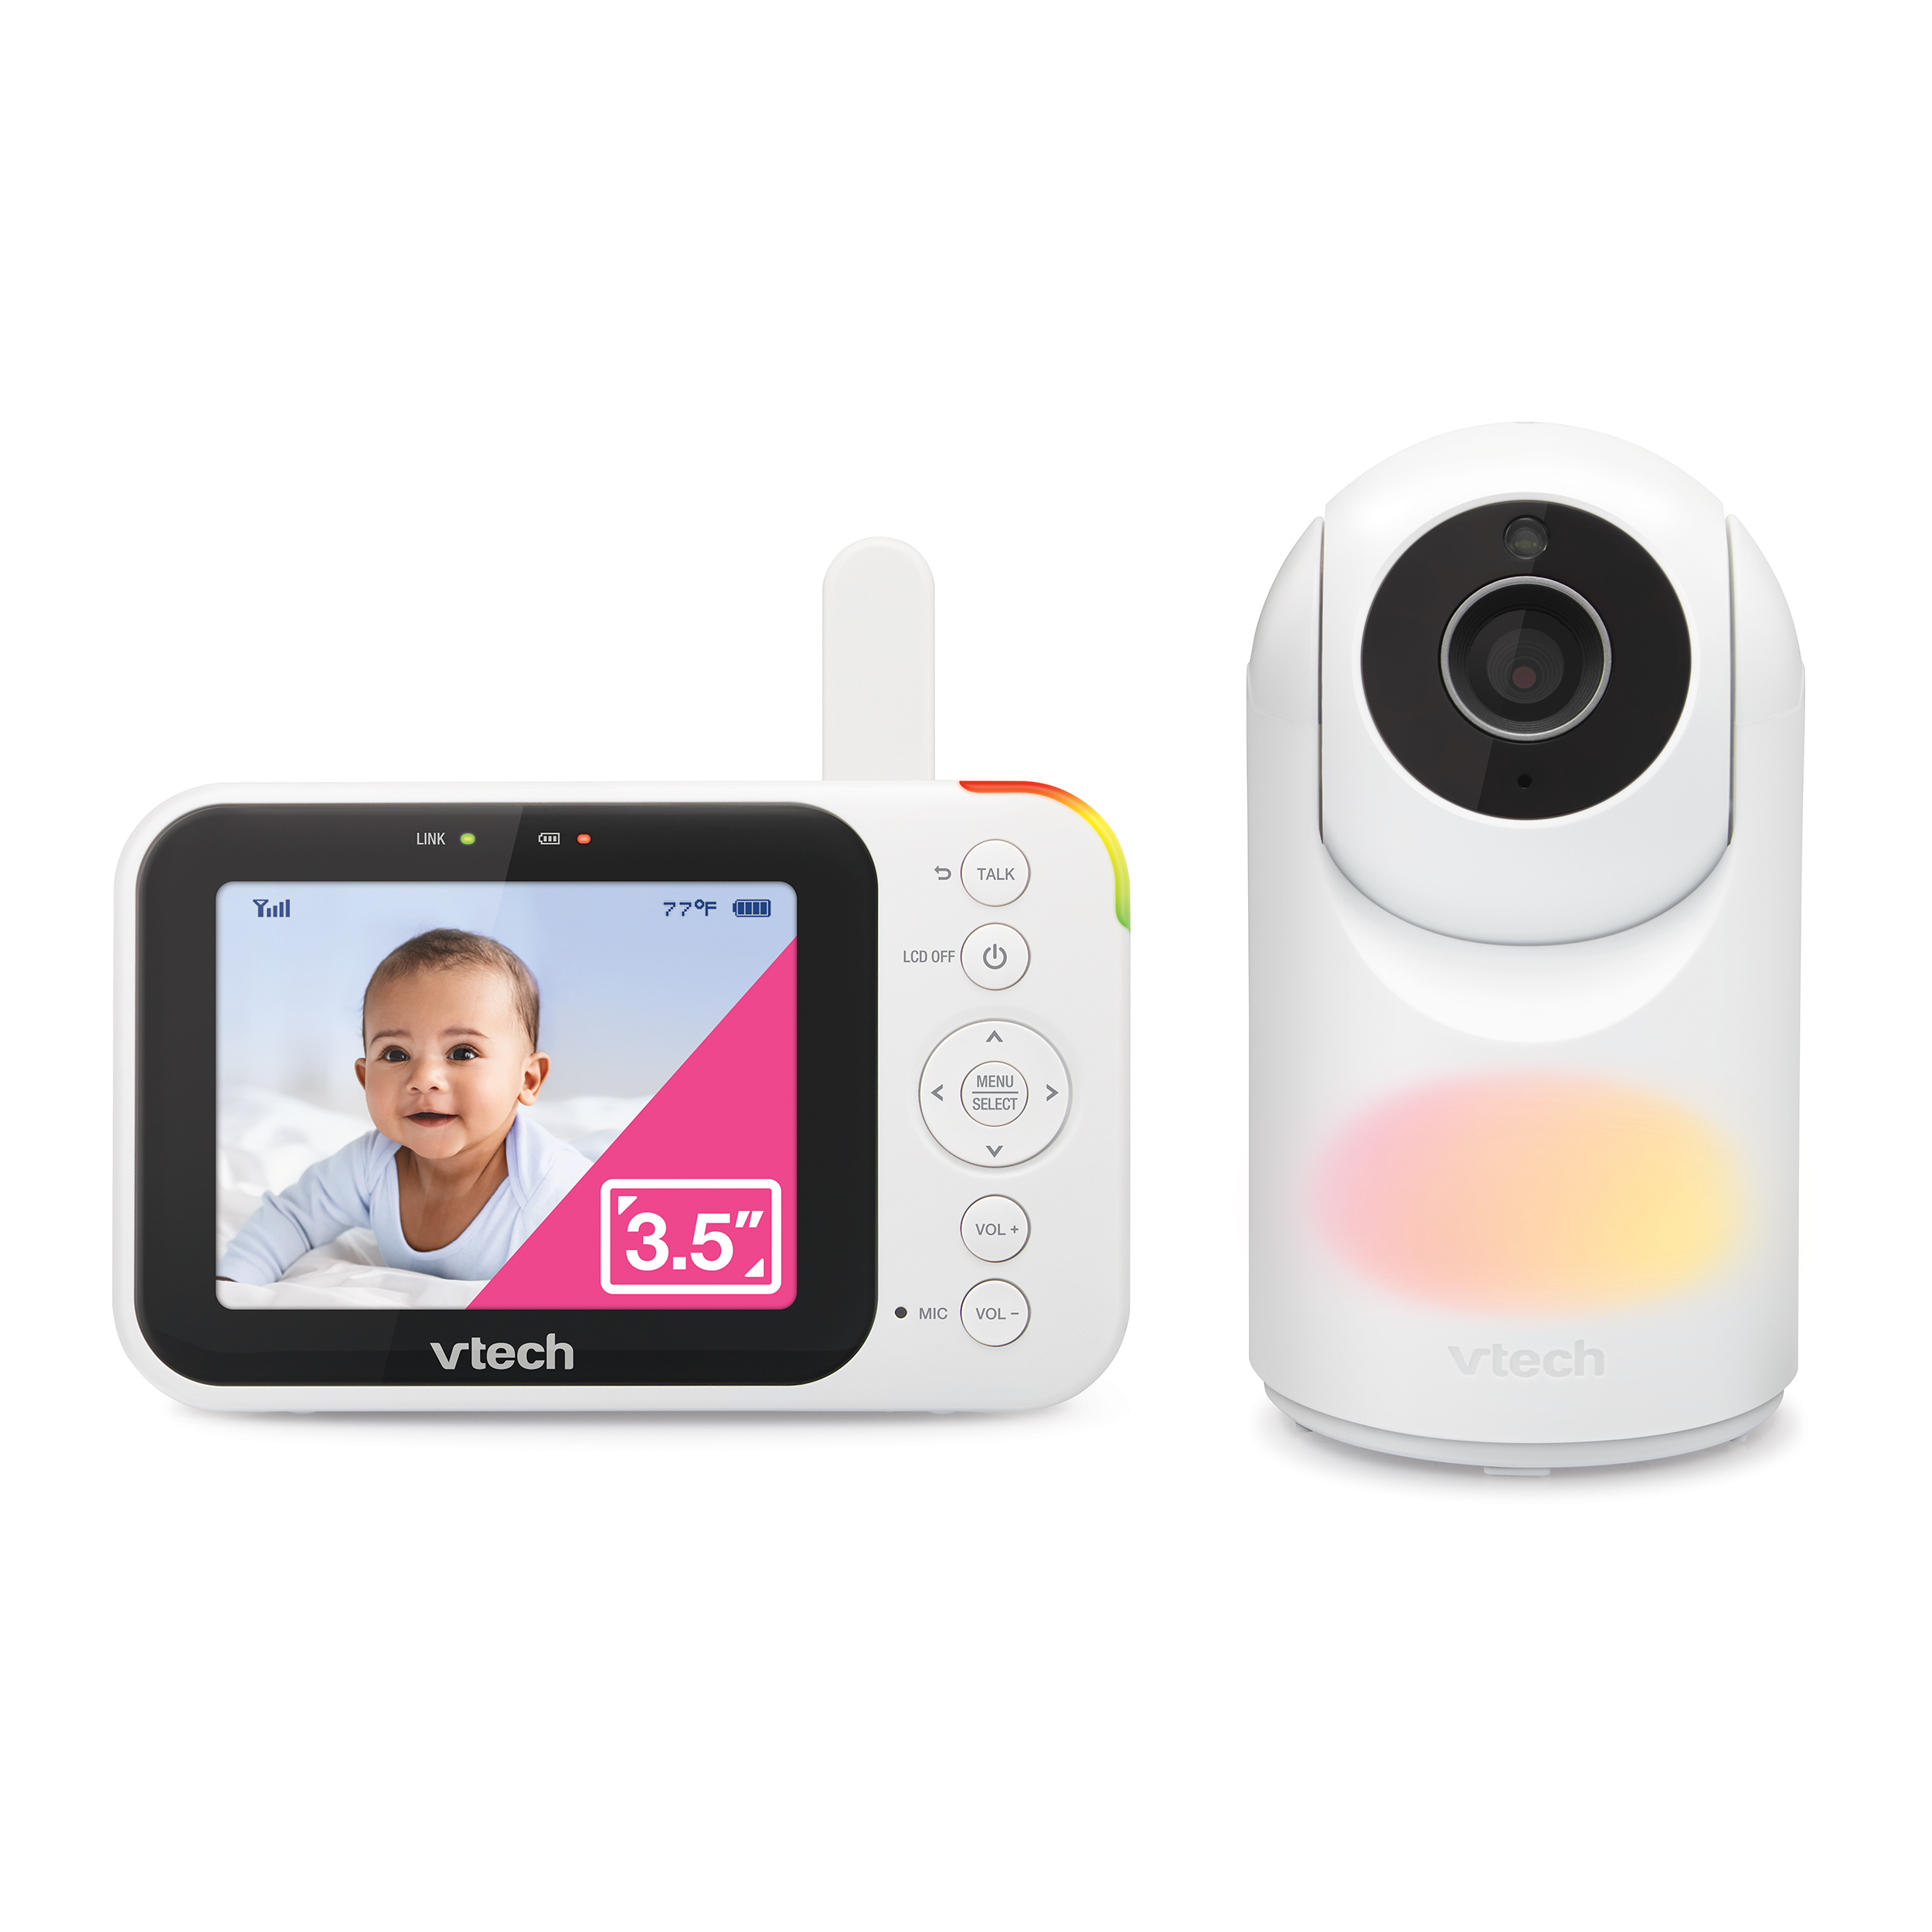 3.5" Digital Video Baby Monitor with Pan and Tilt and Night Light - view 1